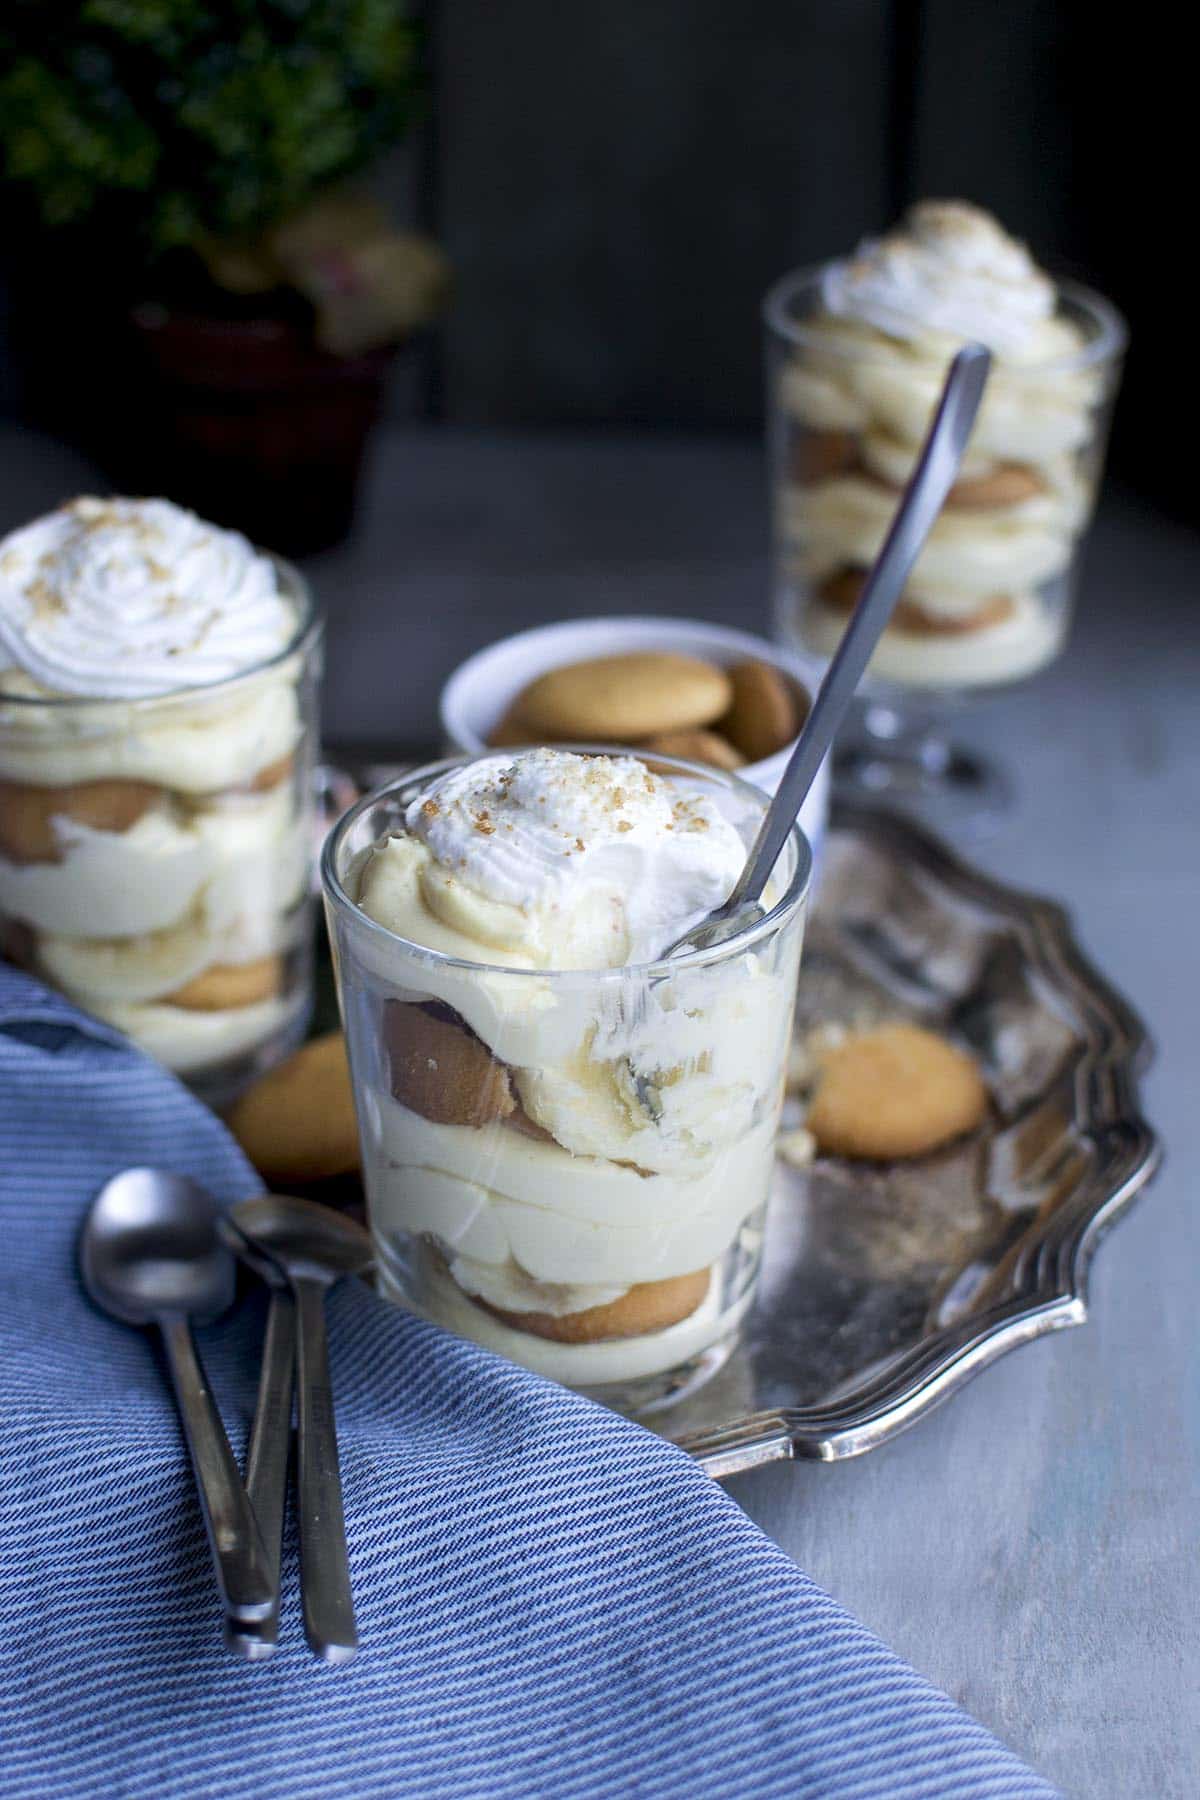 Silver plate with individual banana pudding in a cup